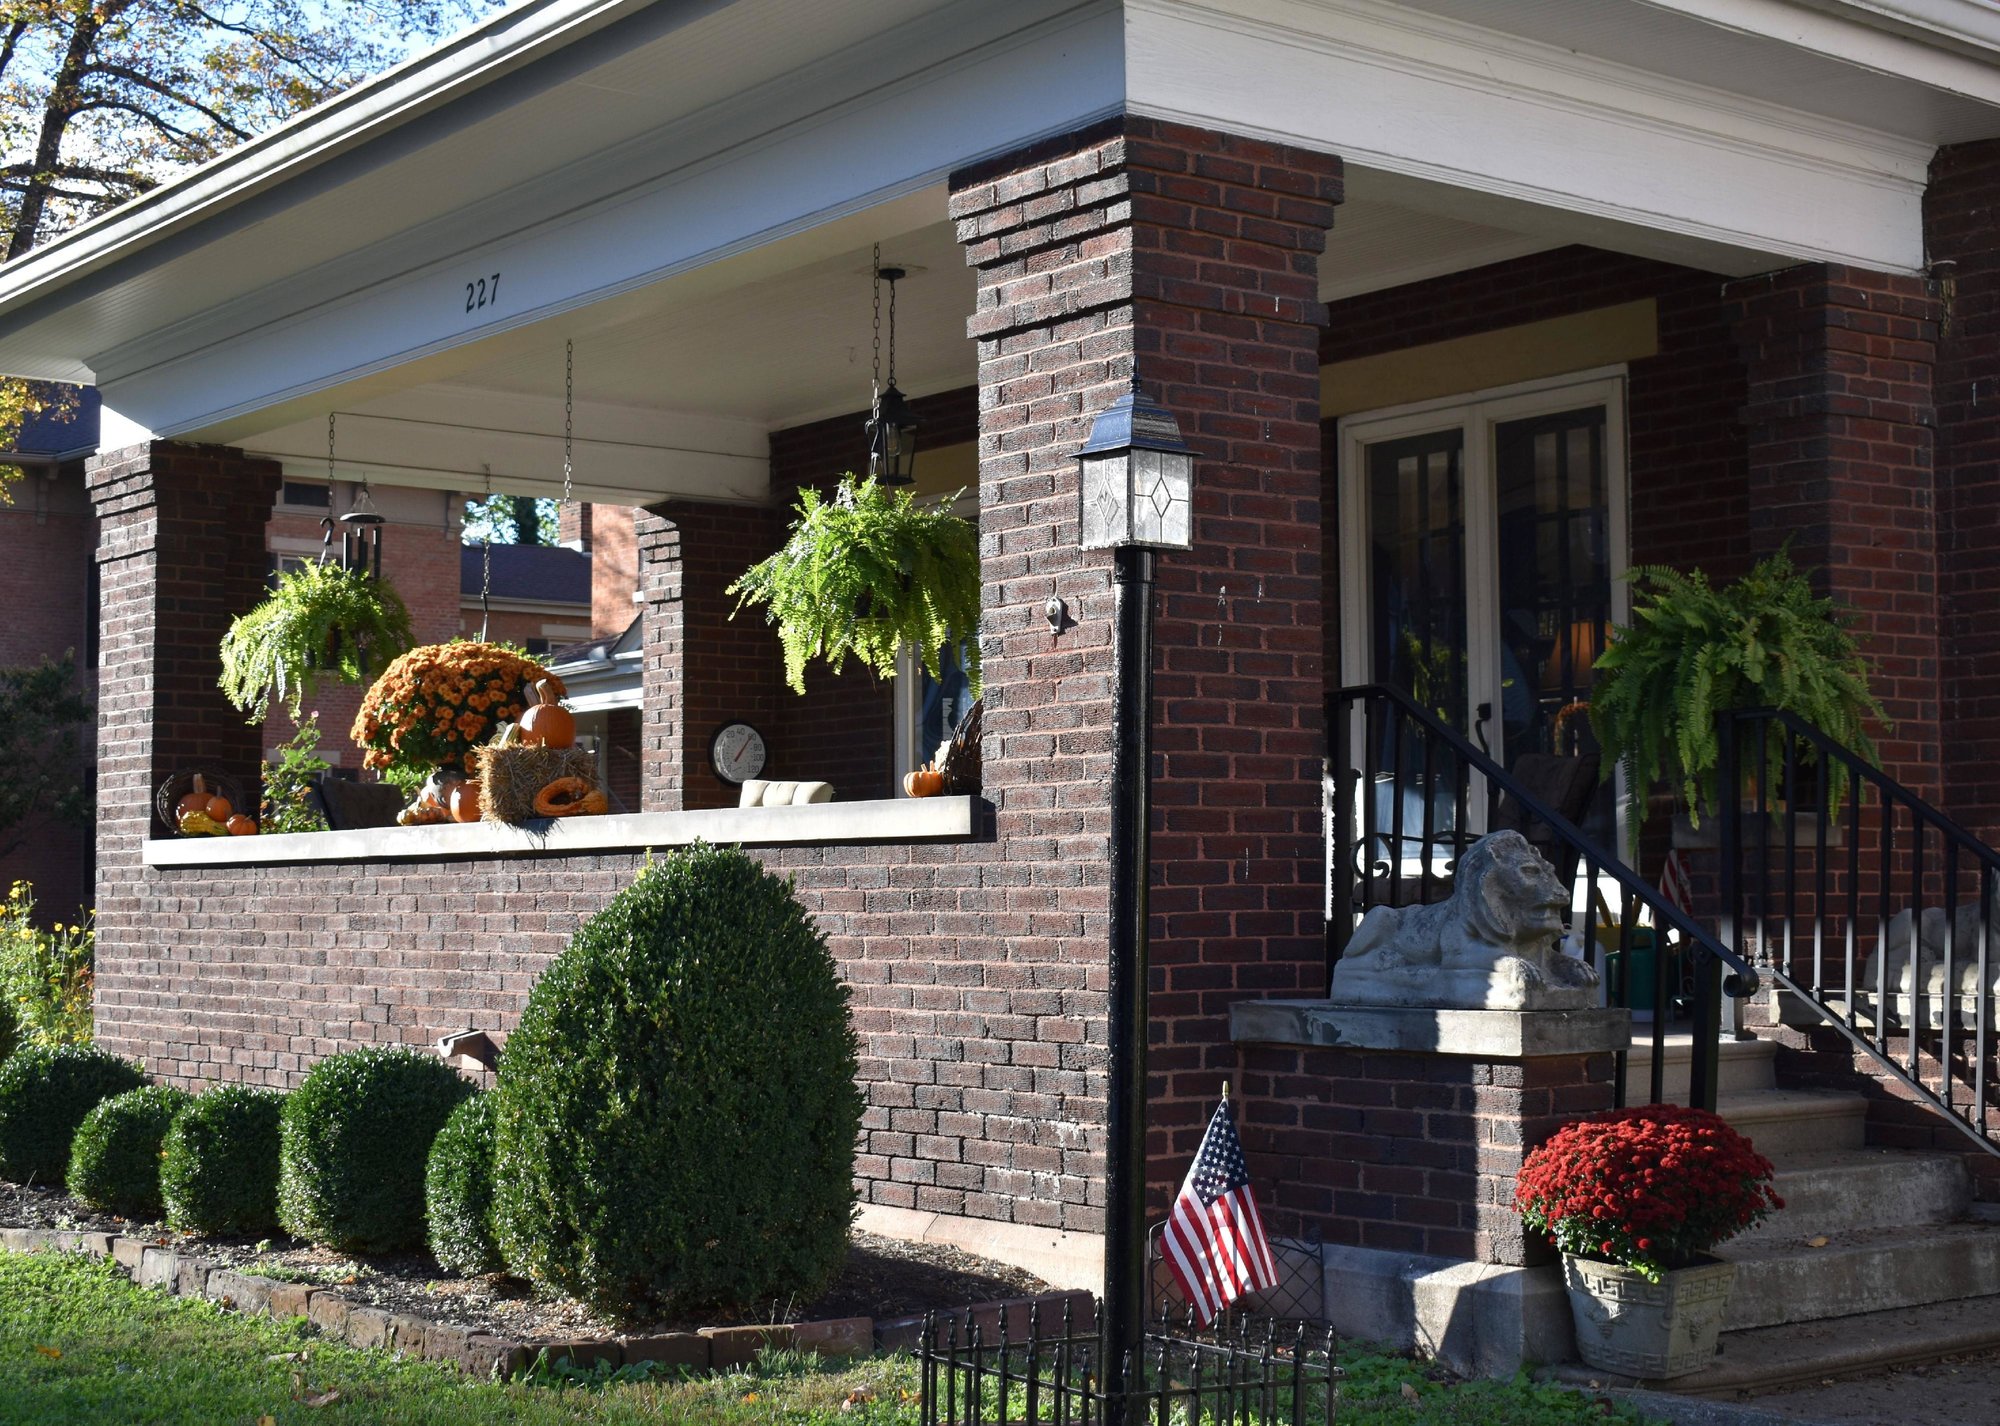 “Front porch of brick home with American flag in planter” - Source: Yana Smith // Shutterstock